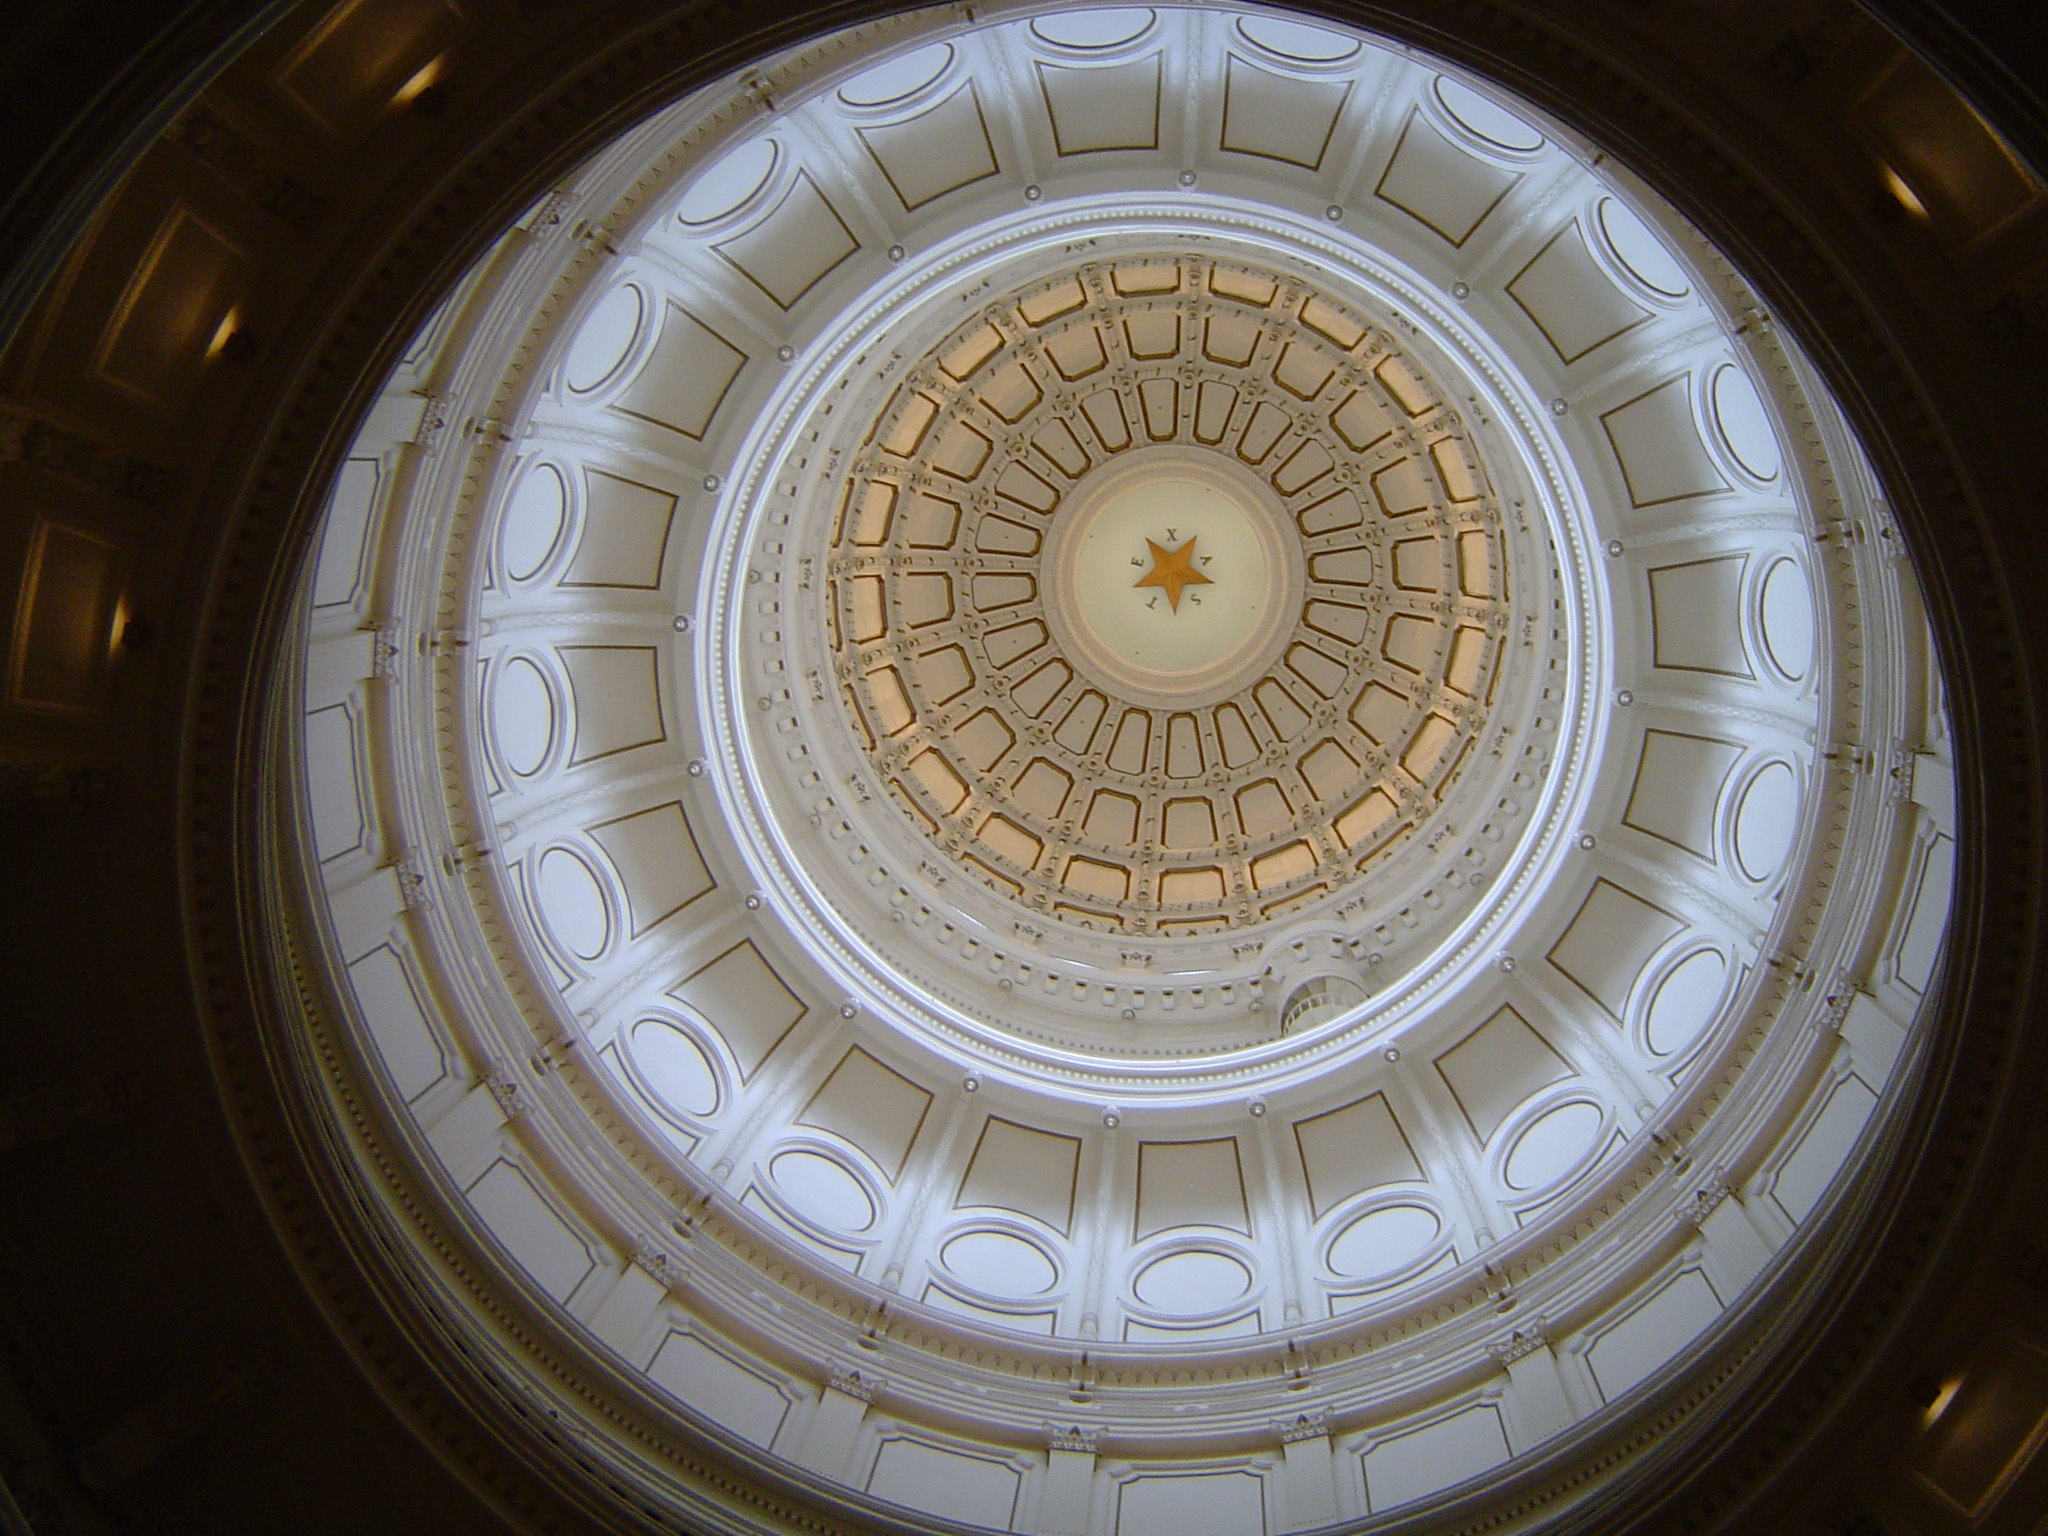 In the Texas State Capitol Dome or Statehouse Building